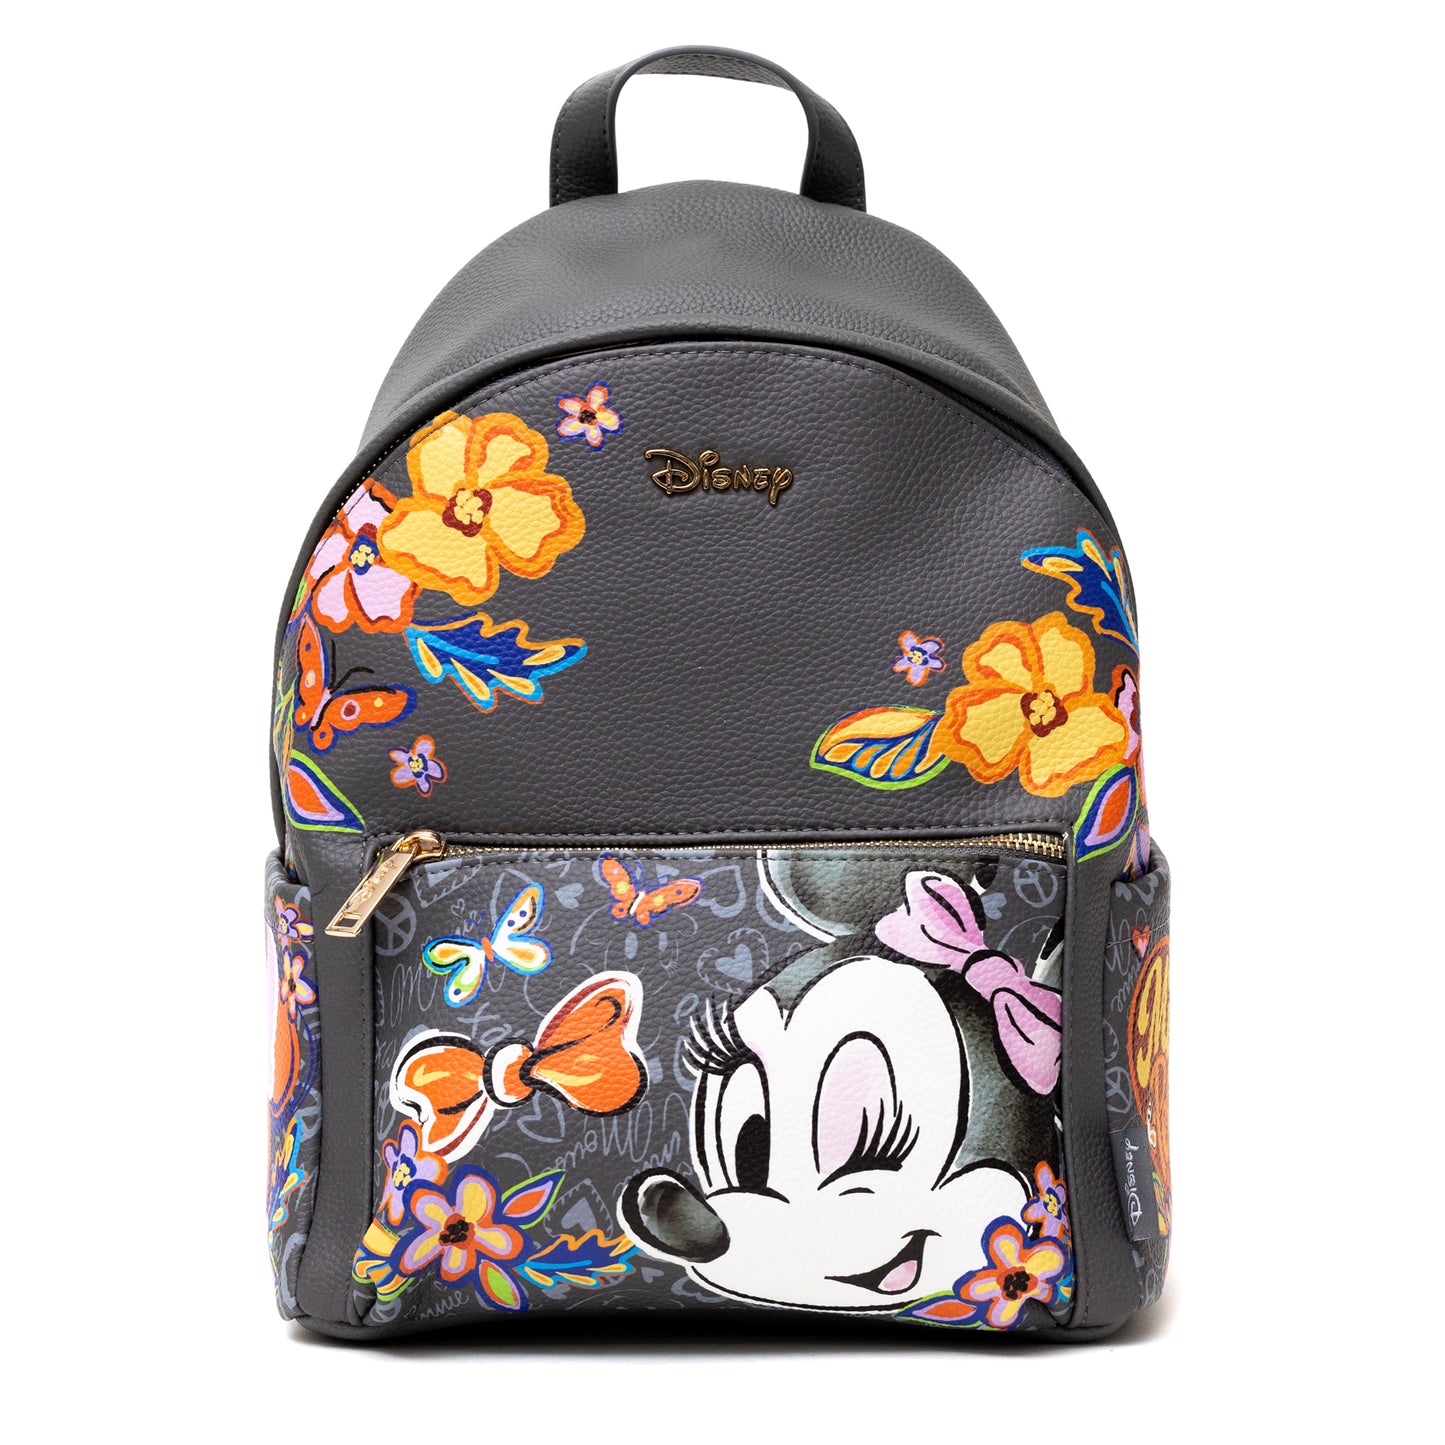 Wondapop Disney Mickey Mouse and Friends 17 Full Size Nylon Backpack